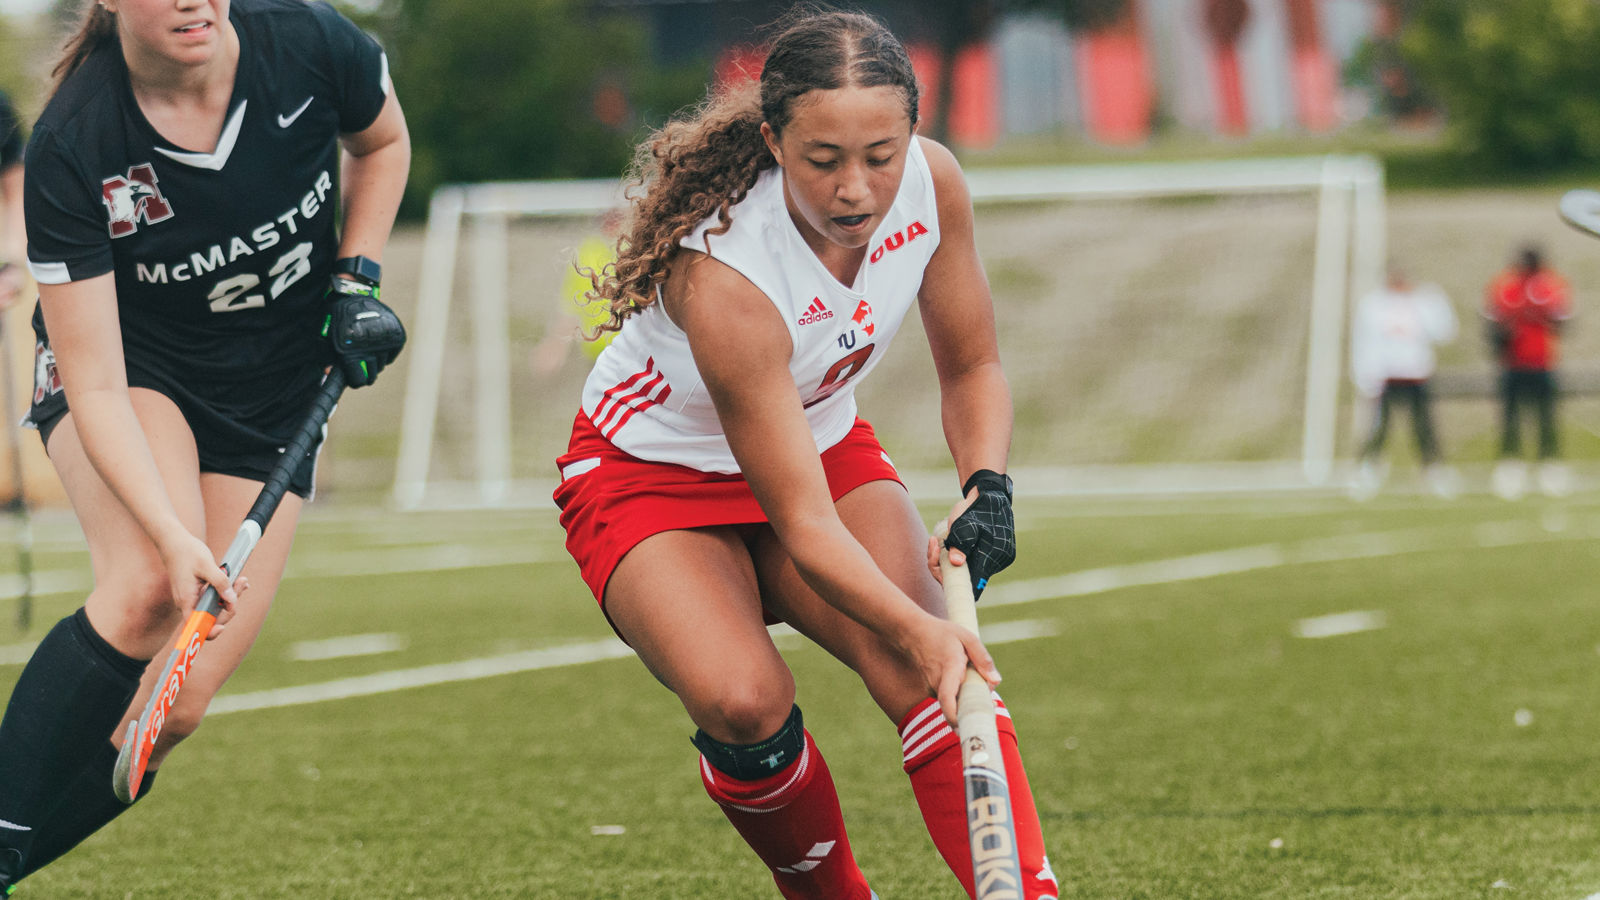 Action photo of York field hockey player running with the ball on her stick during a game as an opposing player tries to defend her